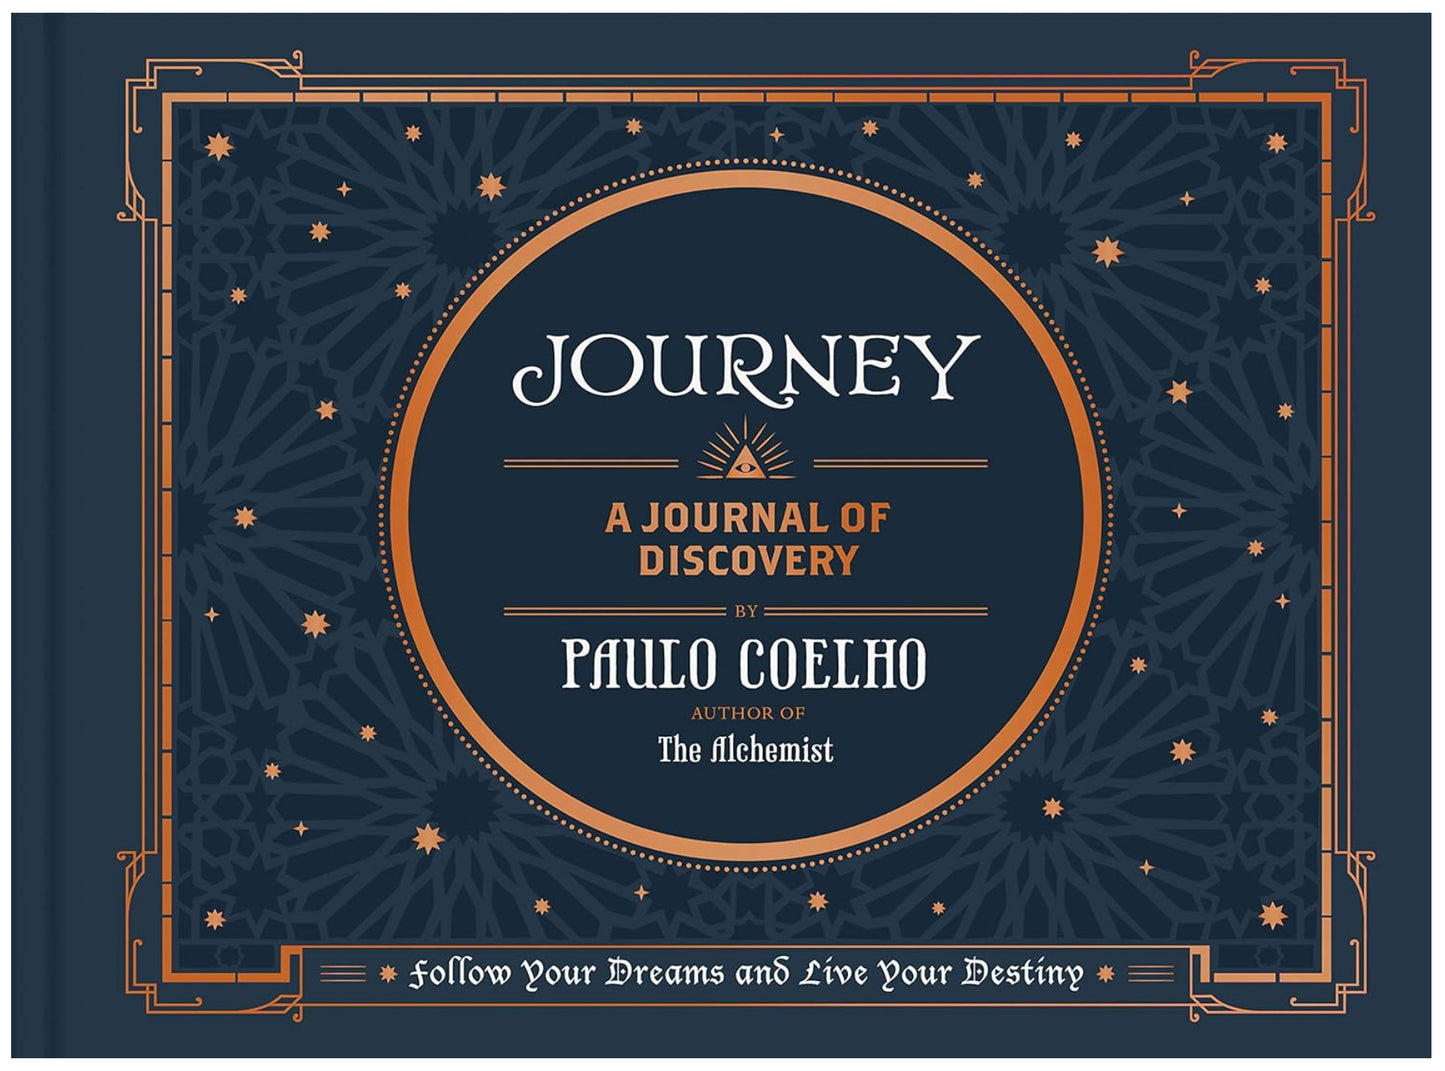 Journey: A Journal of Discovery by Paulo Coelho